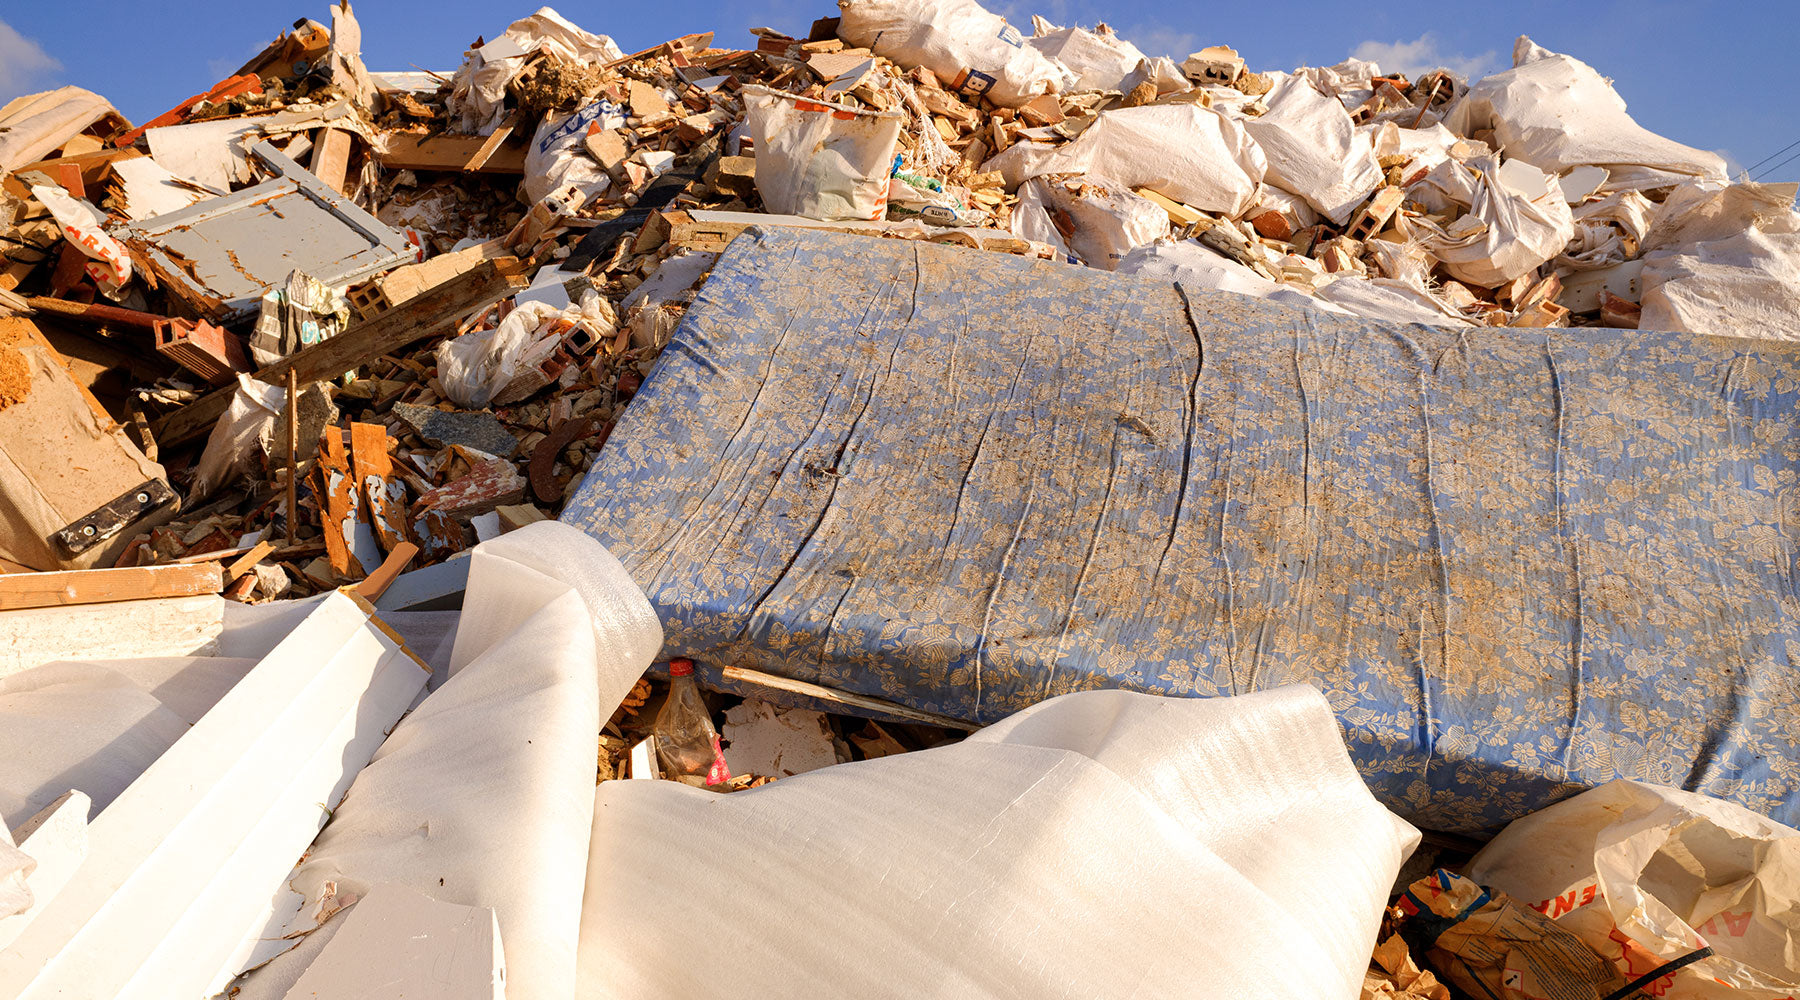 What a Waste - The truth about mattresses and landfill